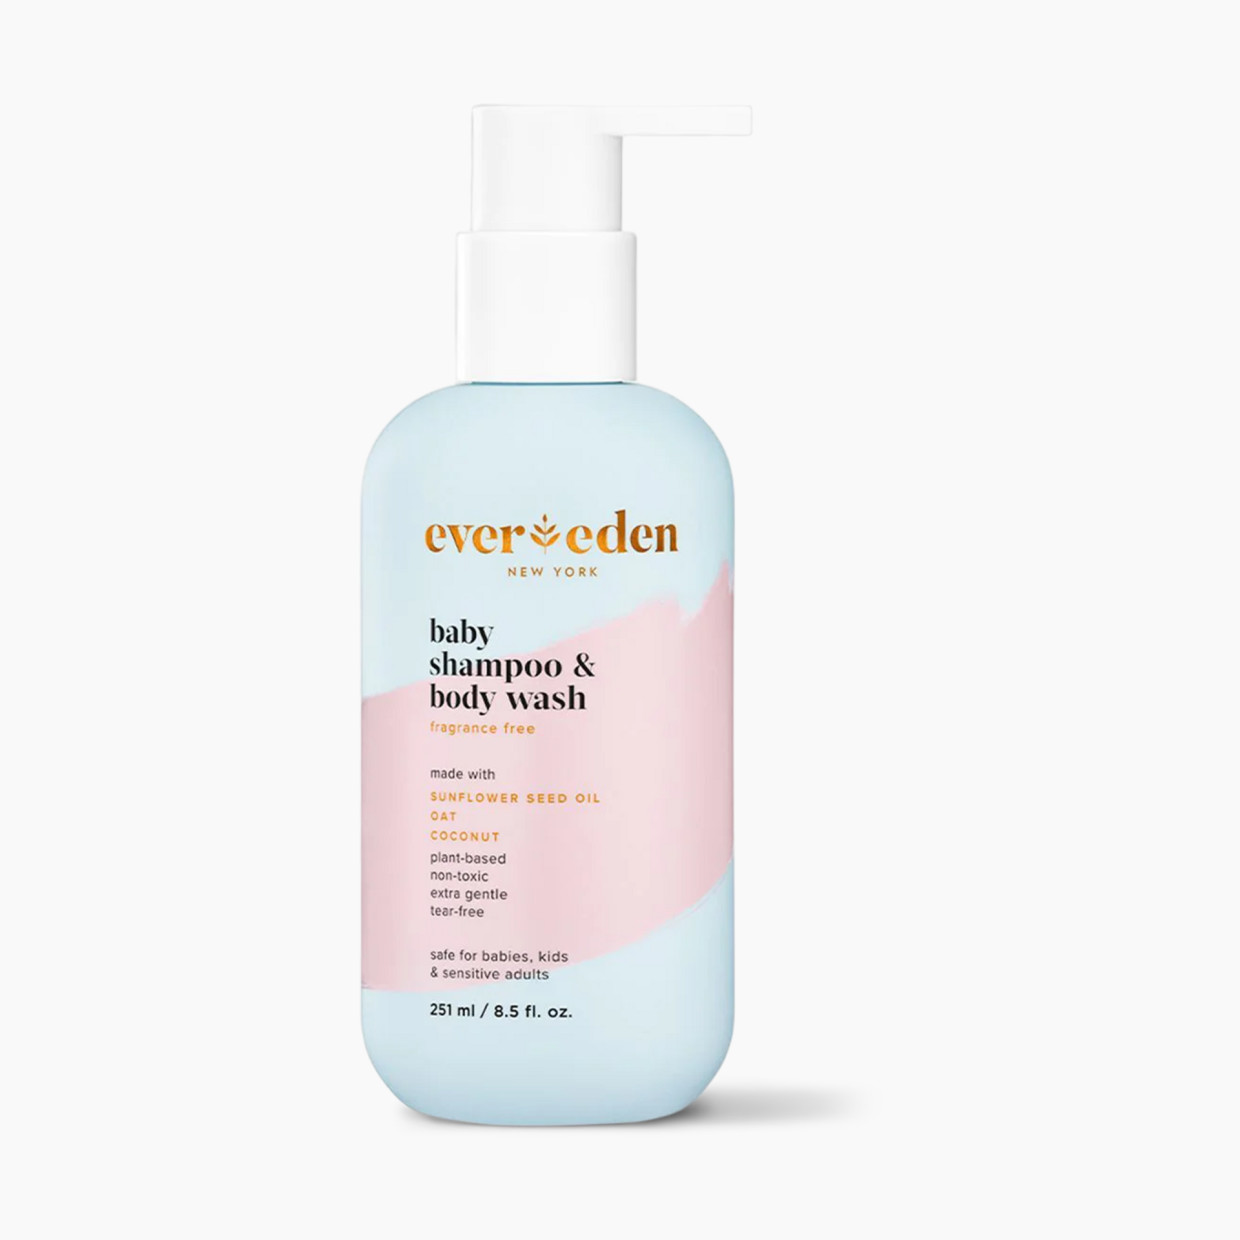 Evereden Baby Shampoo and Body Wash - Fragrance Free, 251ml.